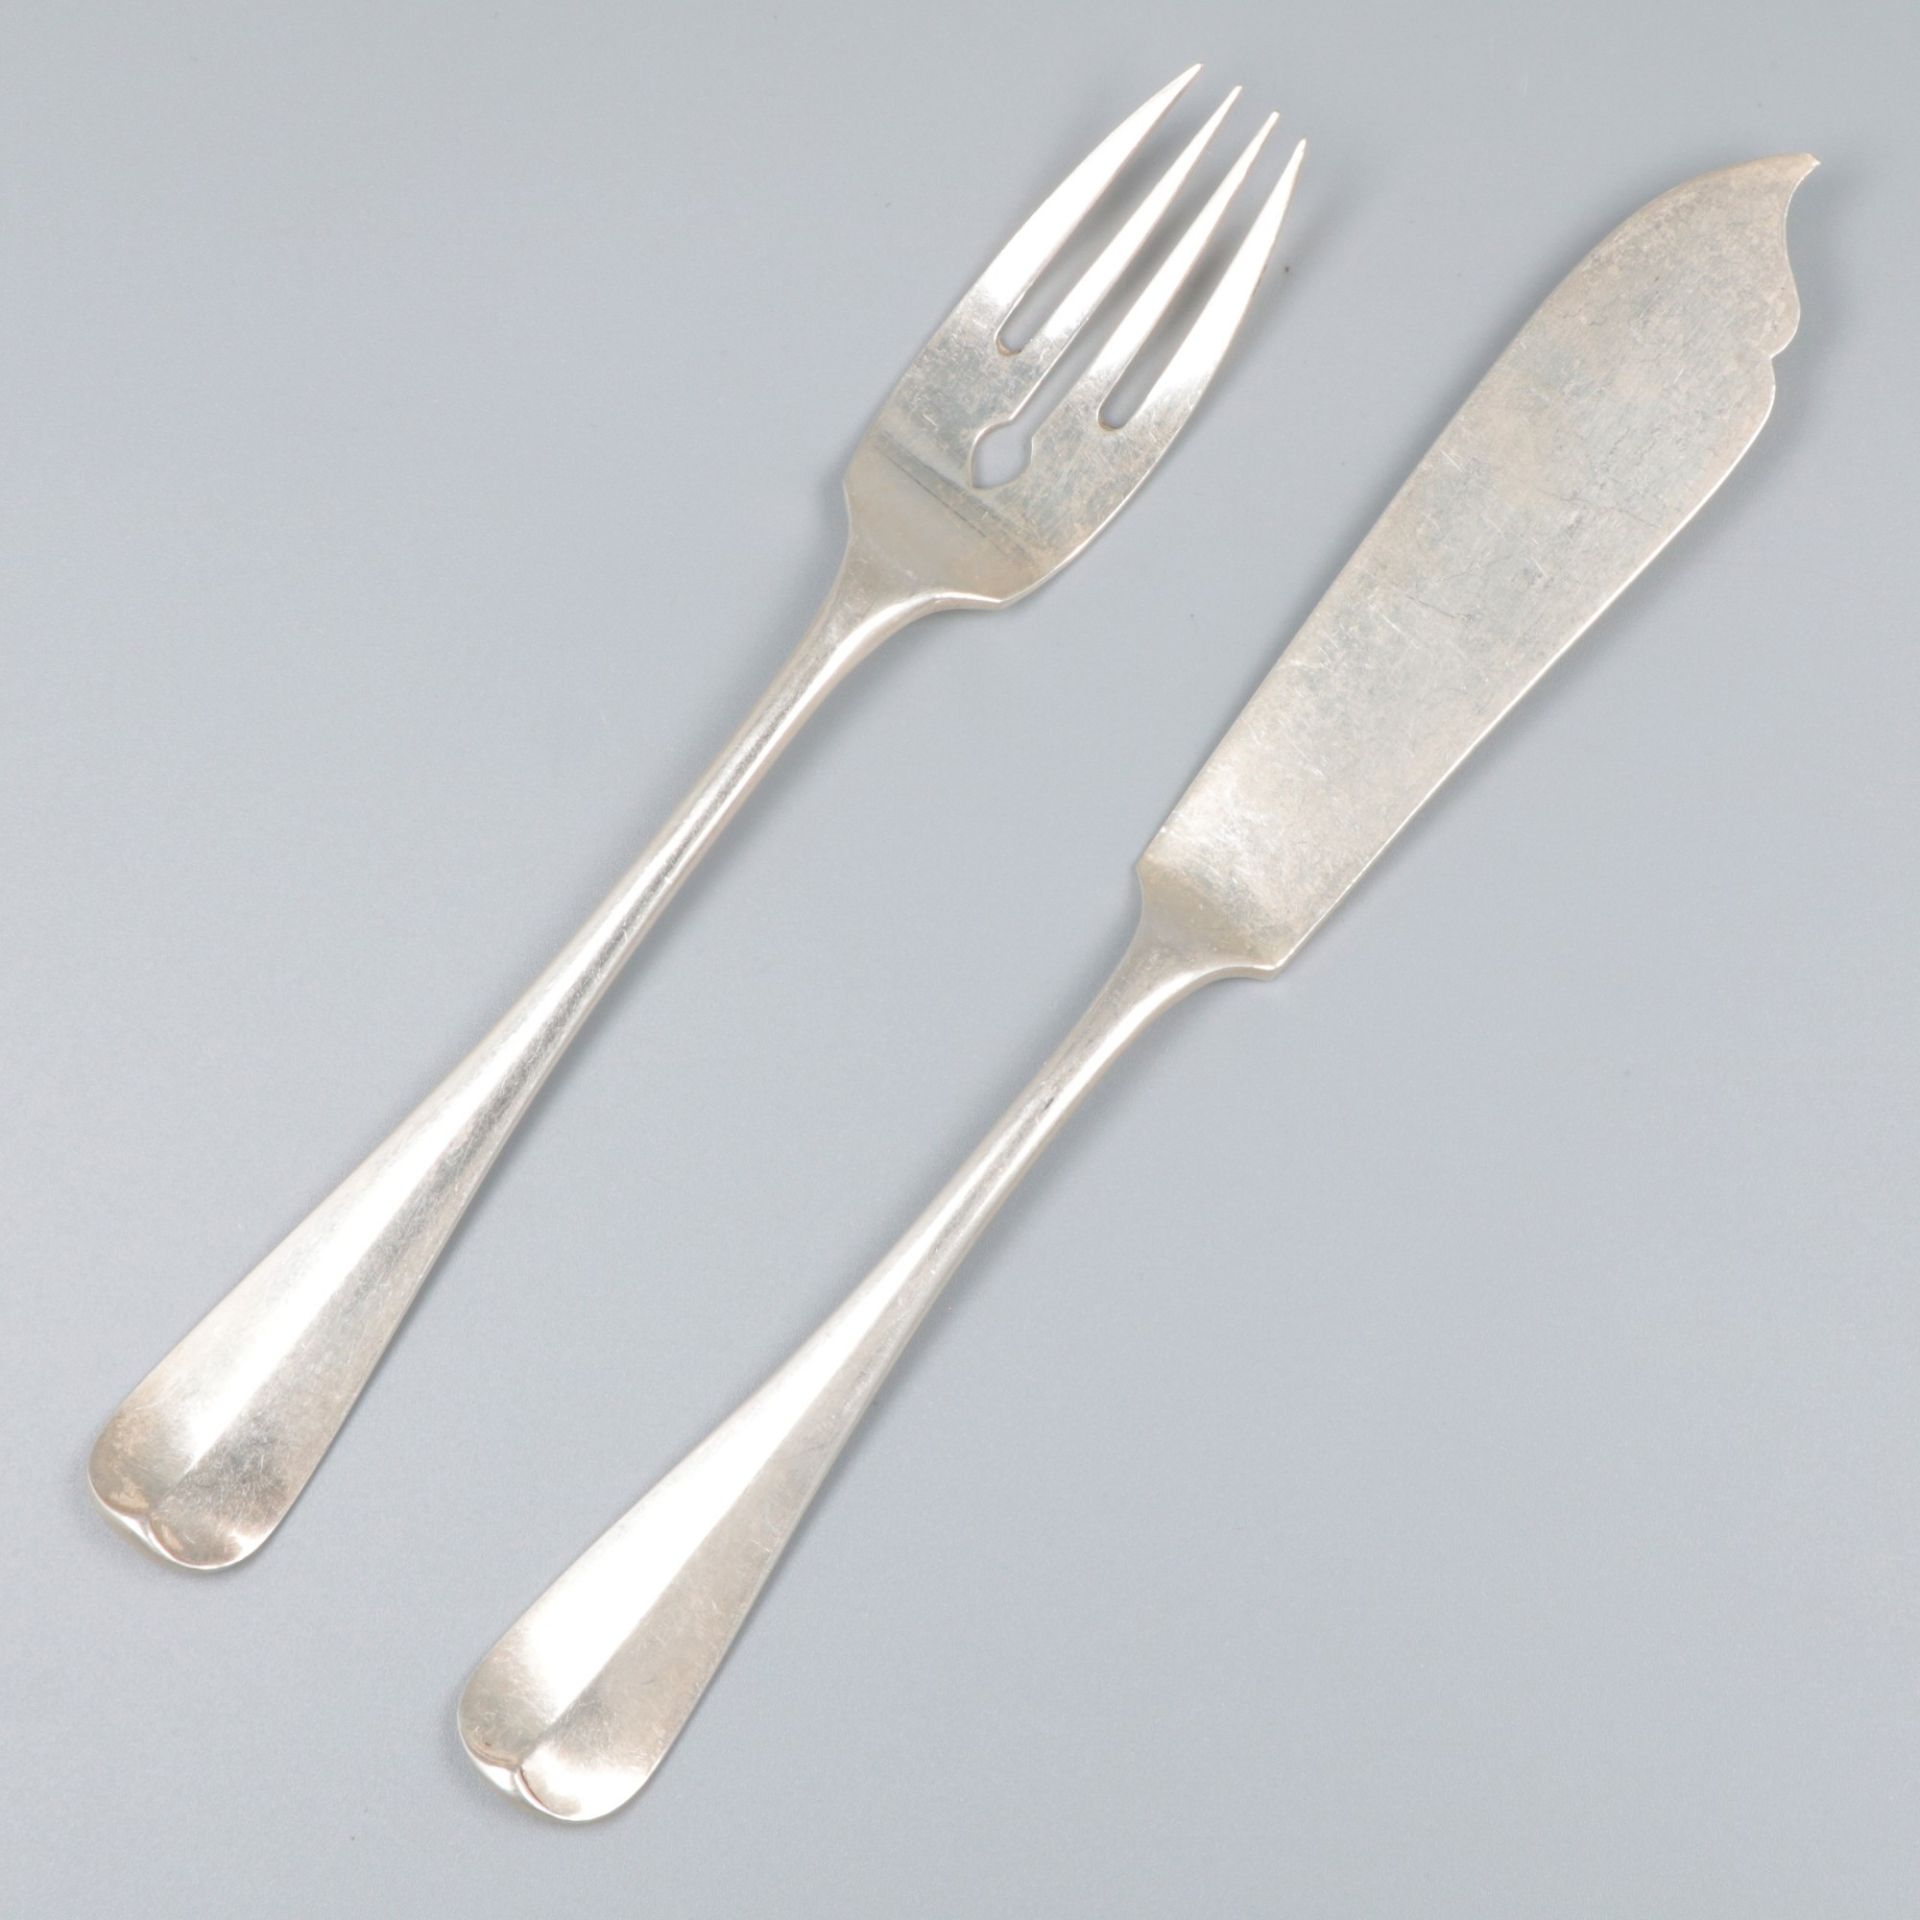 10-piece fish cutlery "Haags Lofje", silver. - Image 2 of 6